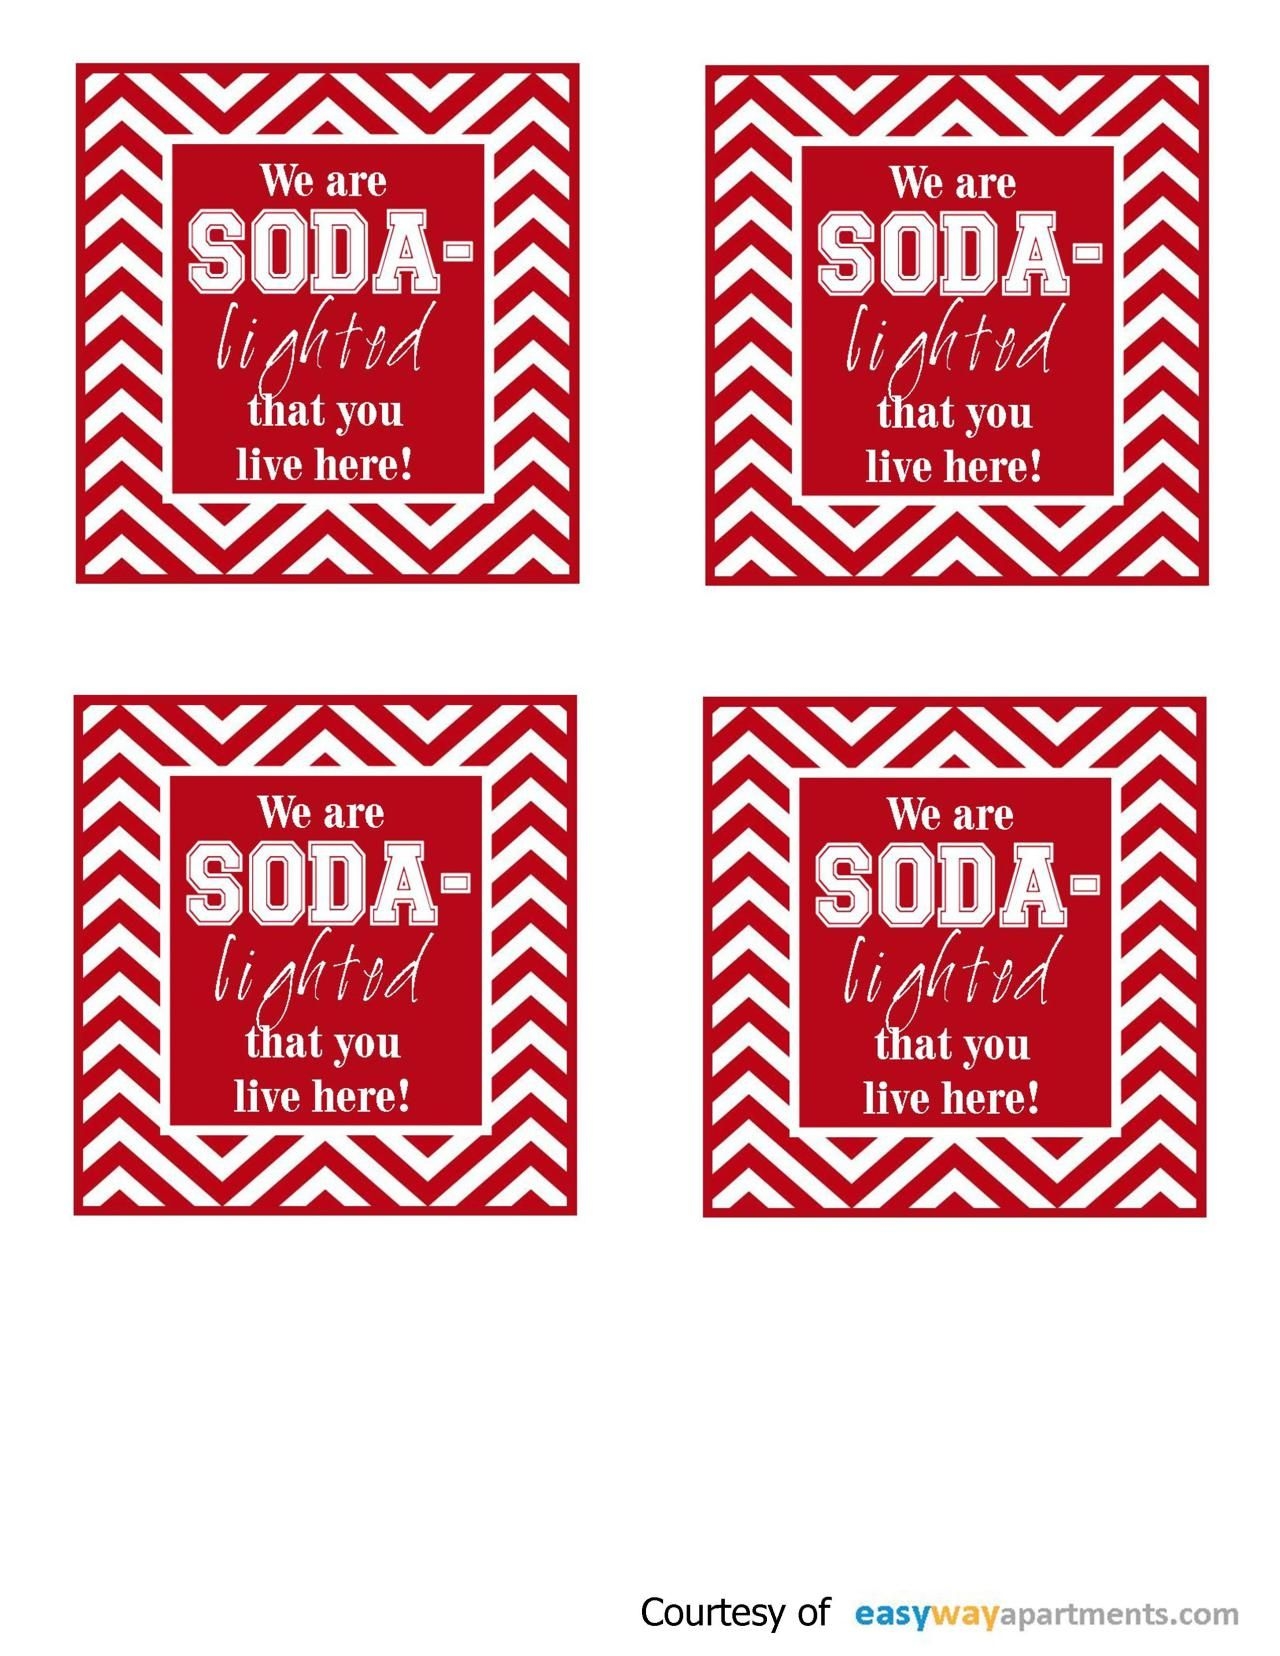 Move In Gift We re Soda Lighted That You Live Here Moving Gifts Free Printables Gifts